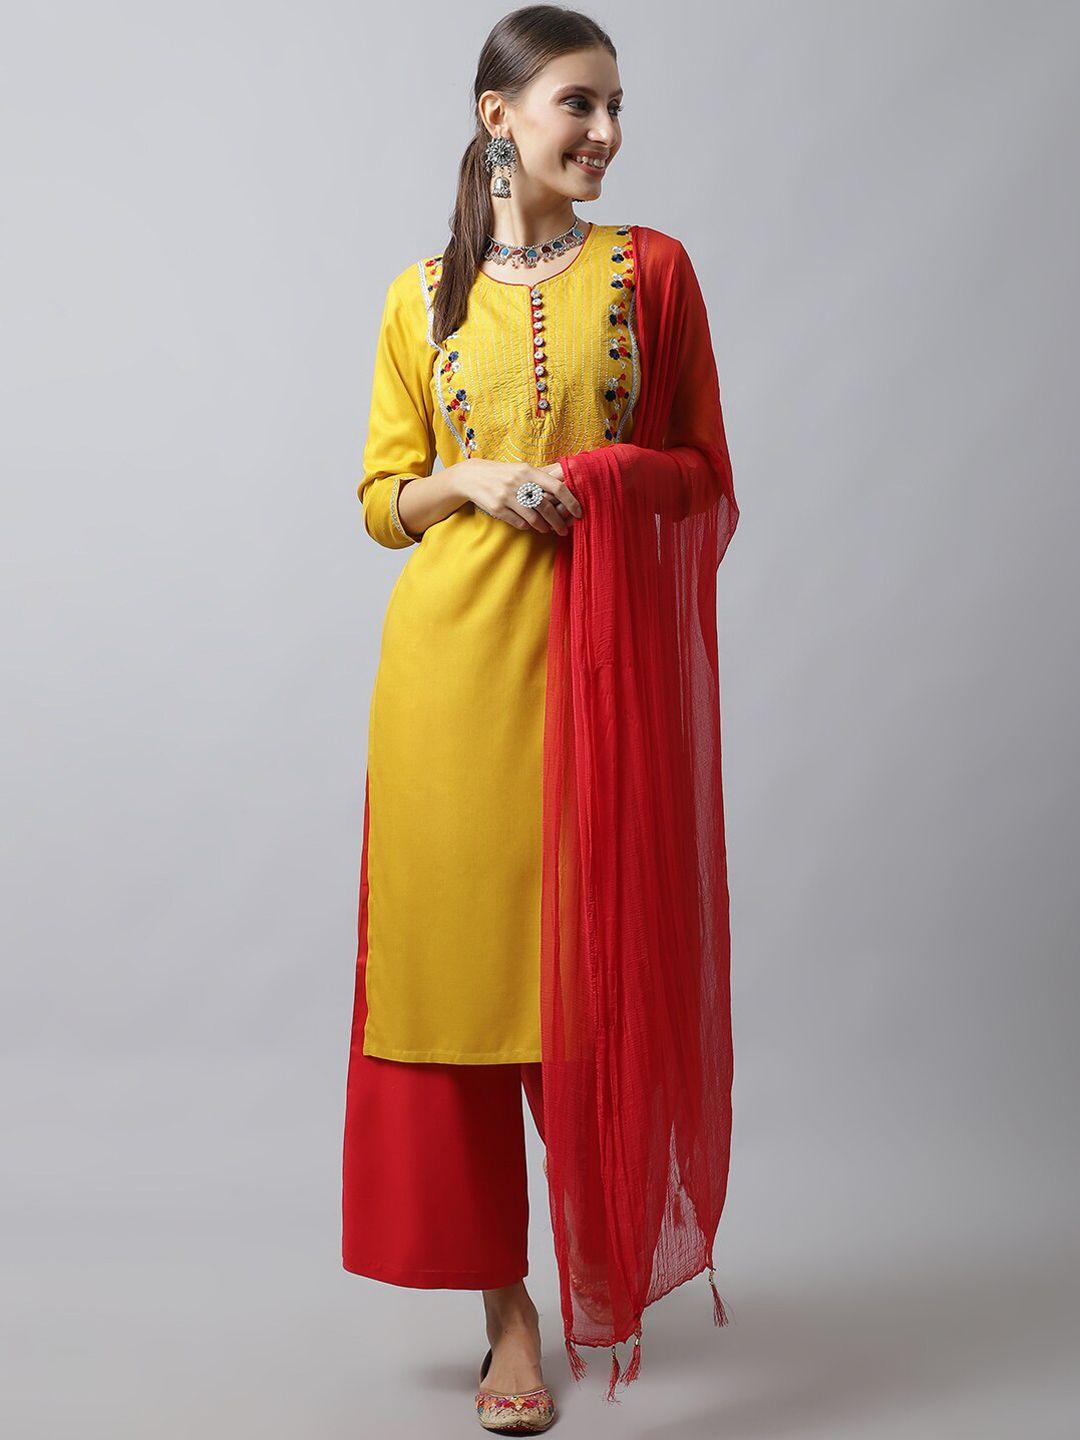 tulsattva-women-mustard-yellow-floral-embroidered-kurta-with-trousers-and-dupatta